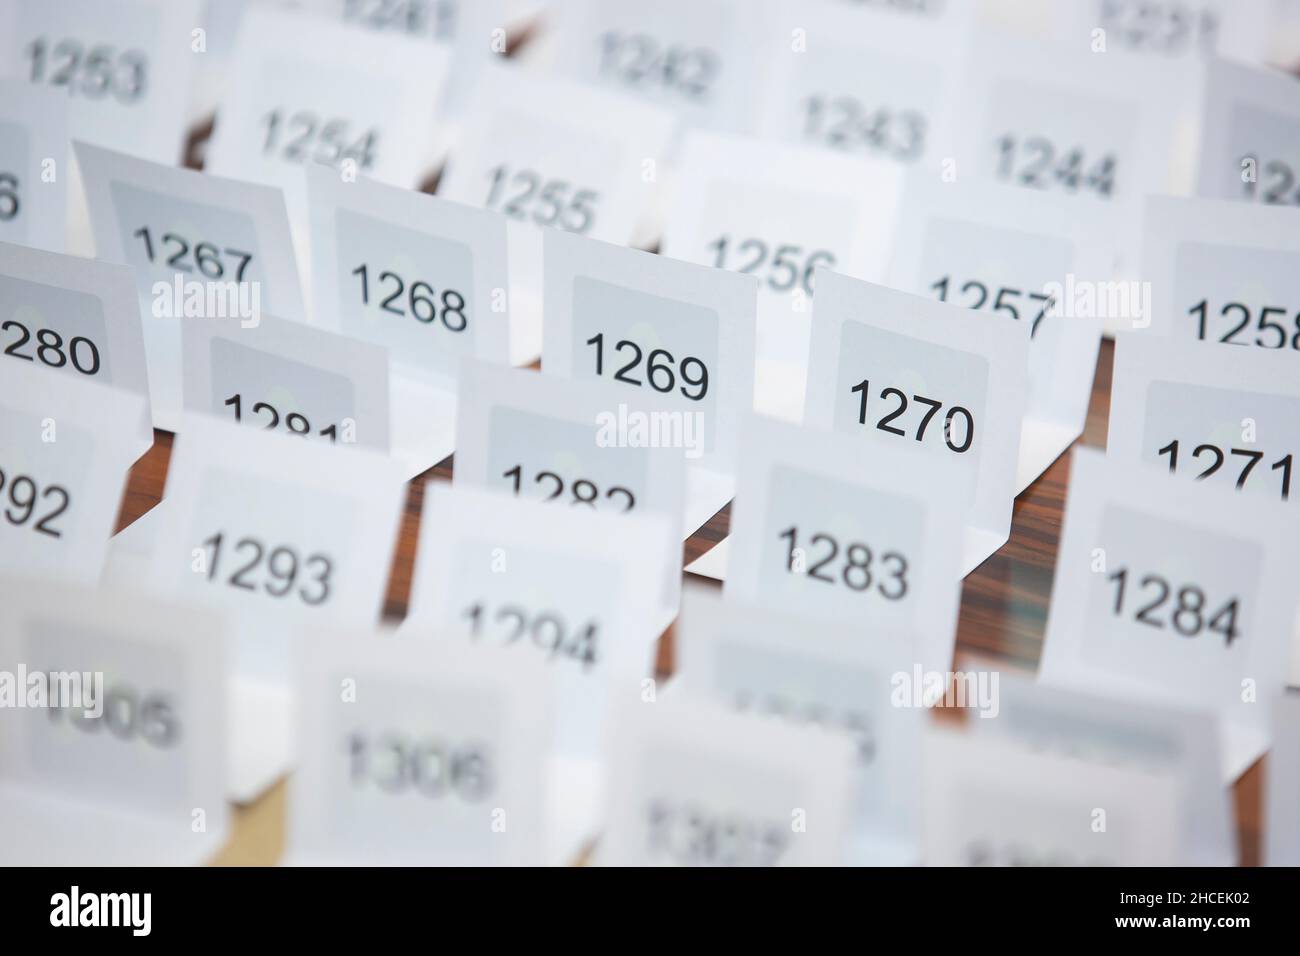 Different numbers printed on sheets of papers organized in a row Stock Photo